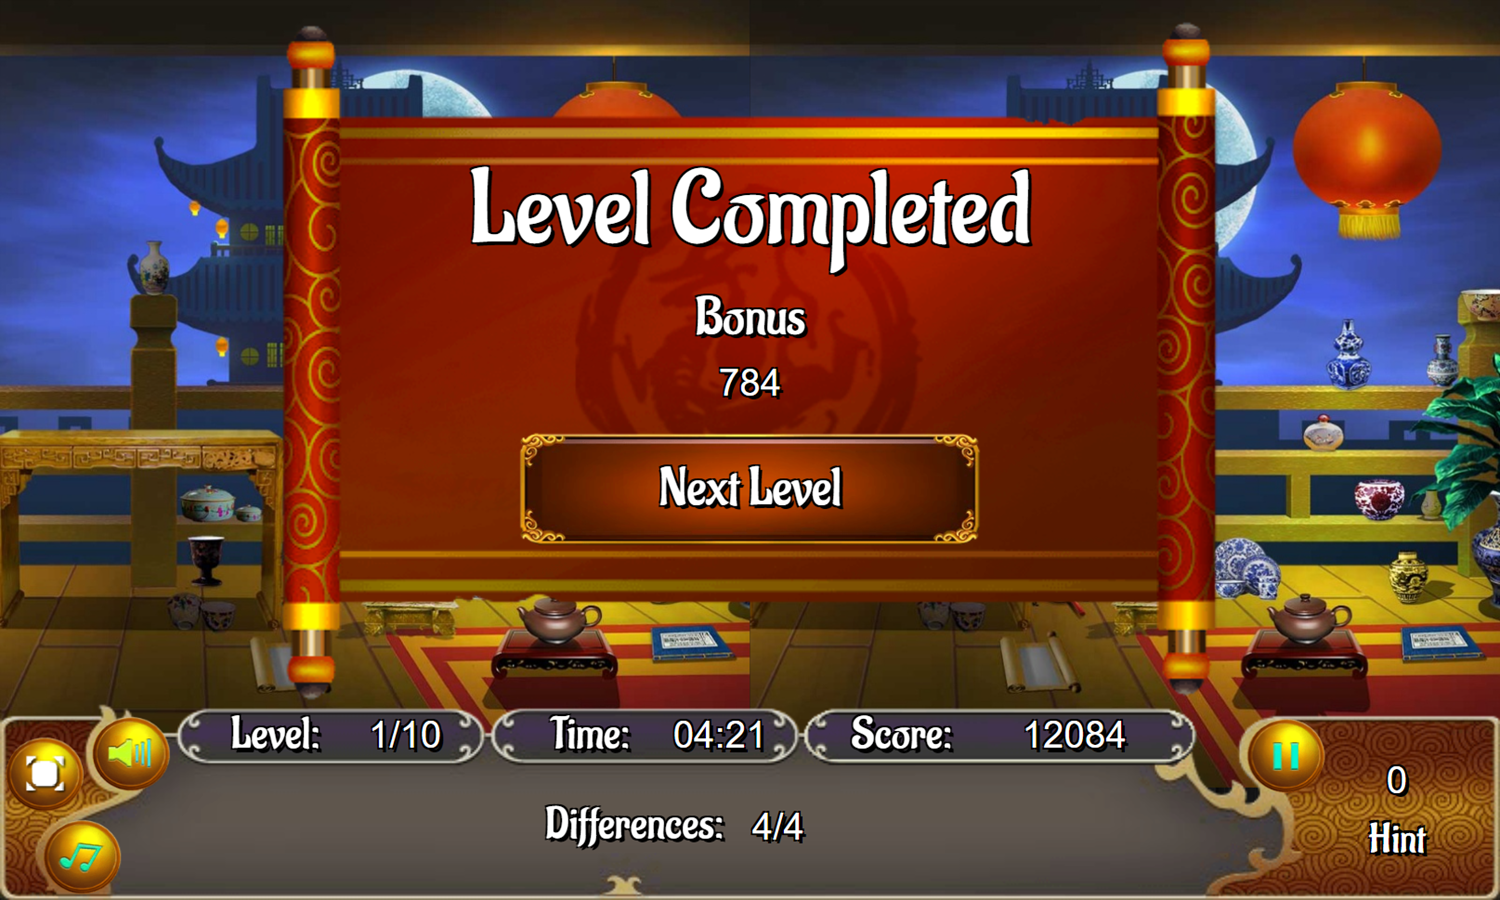 China Temple Game Level Completed Screenshot.